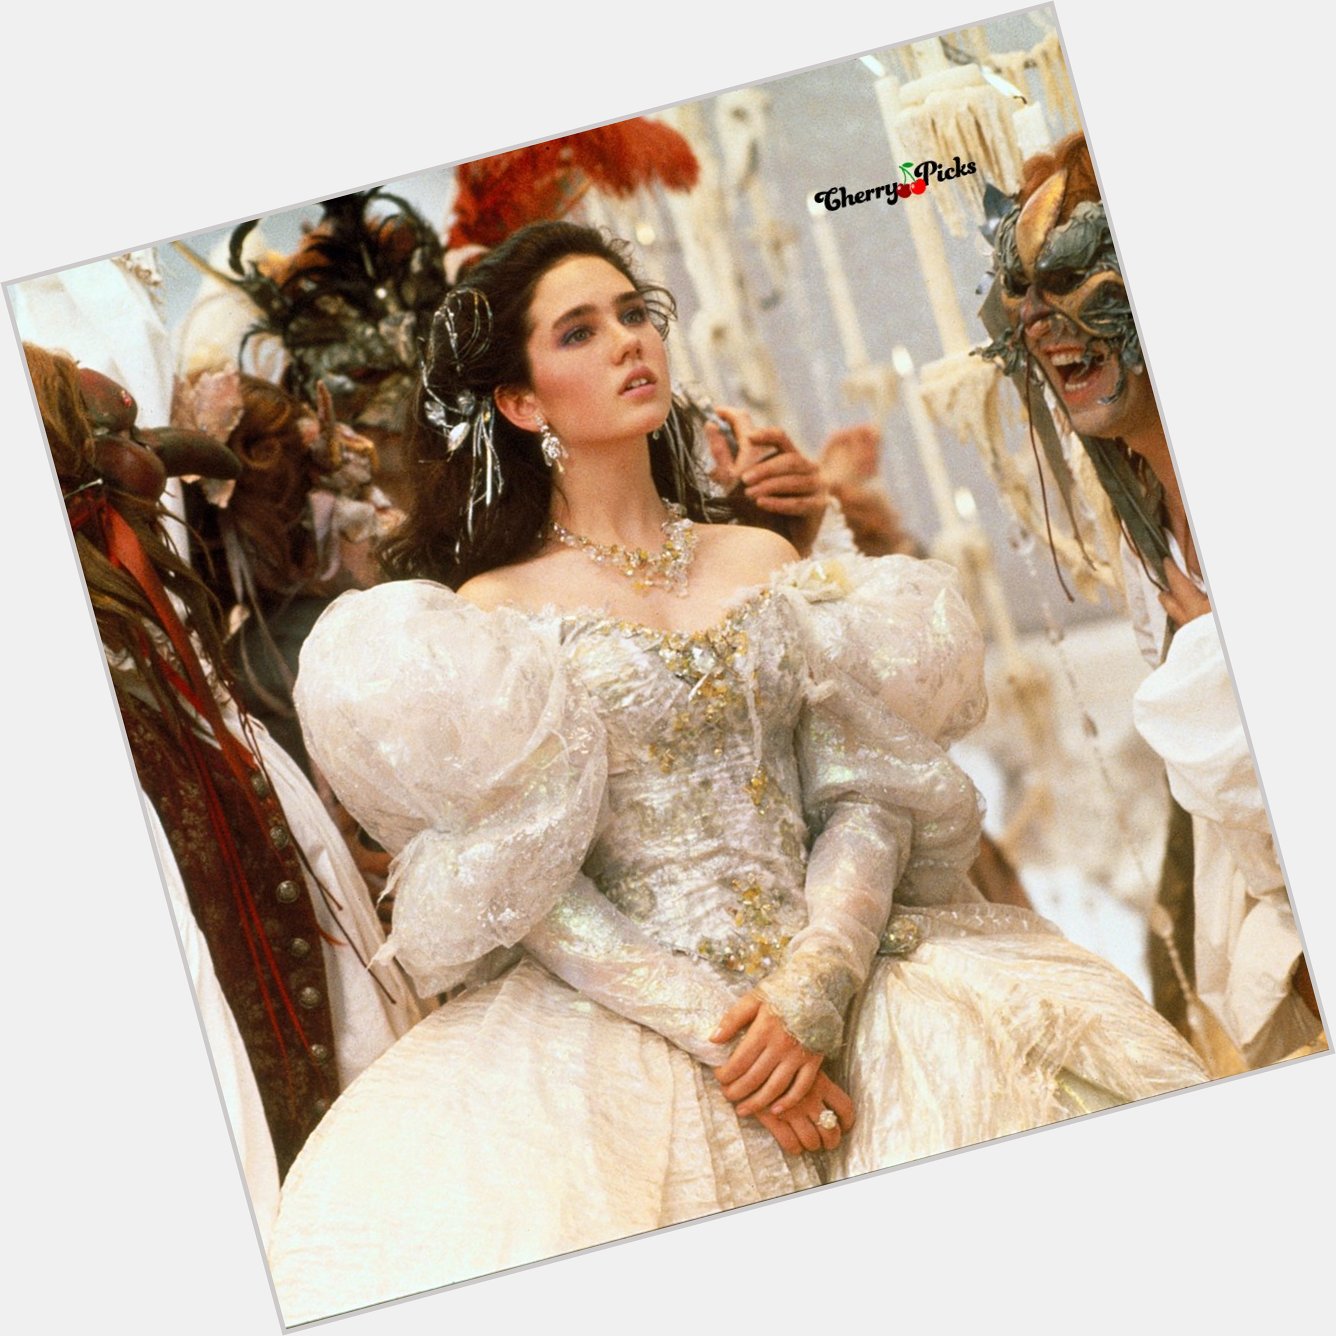 Happy Birthday, Jennifer Connelly!

What\s the first movie you remember the actress from? Ours is Labyrinth! 